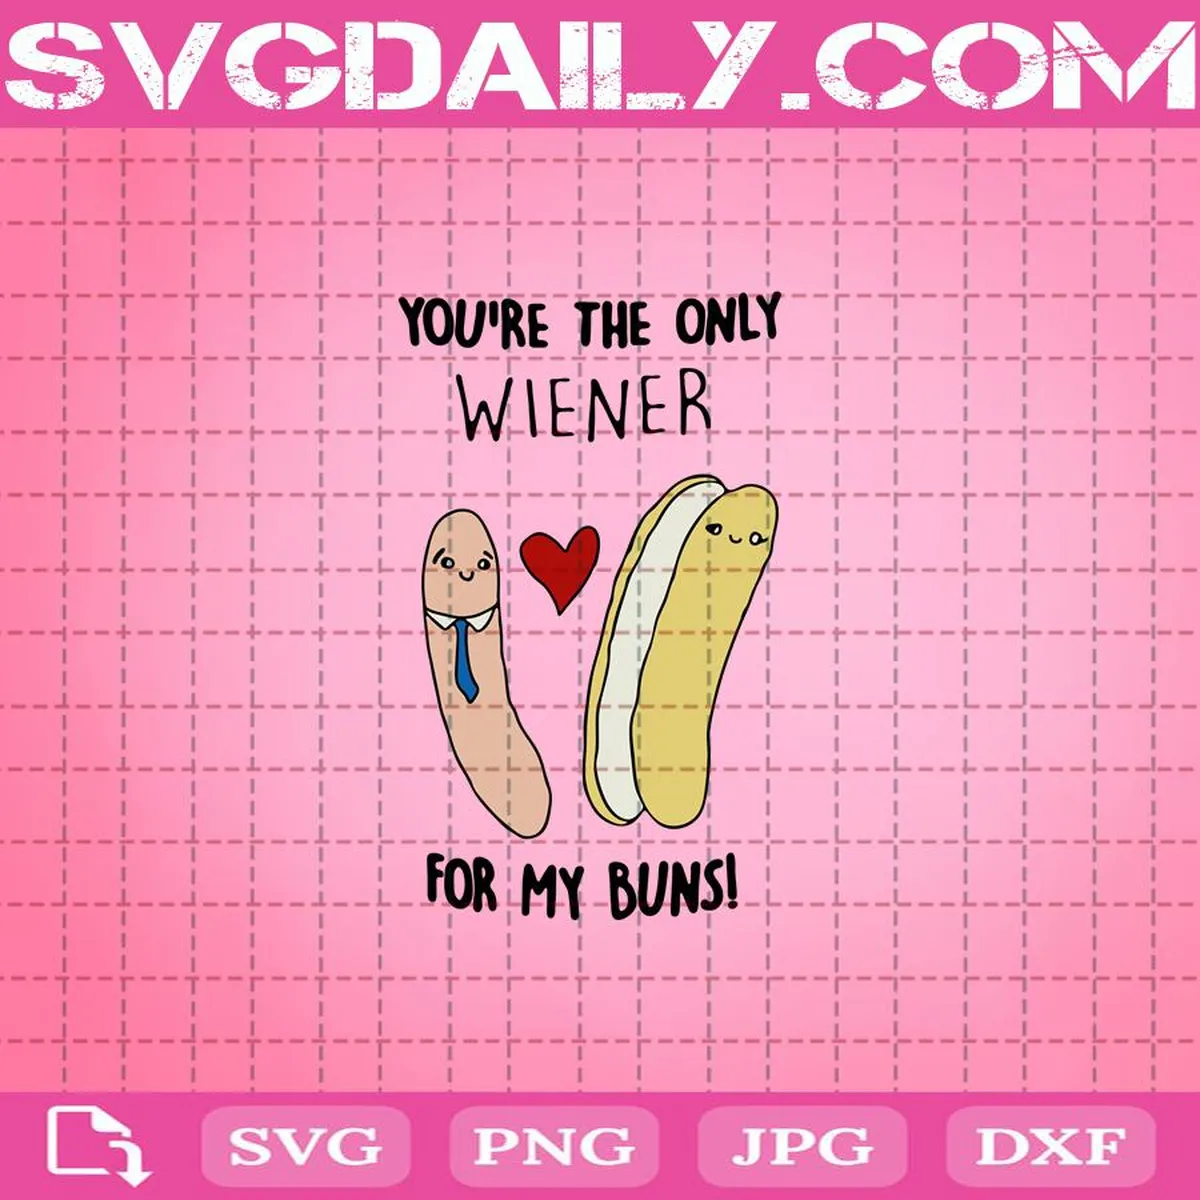 You’re The Only Wiener For My Buns Svg, Valentine's Day Svg, Svg Png Dxf Eps Cut File Instant Download